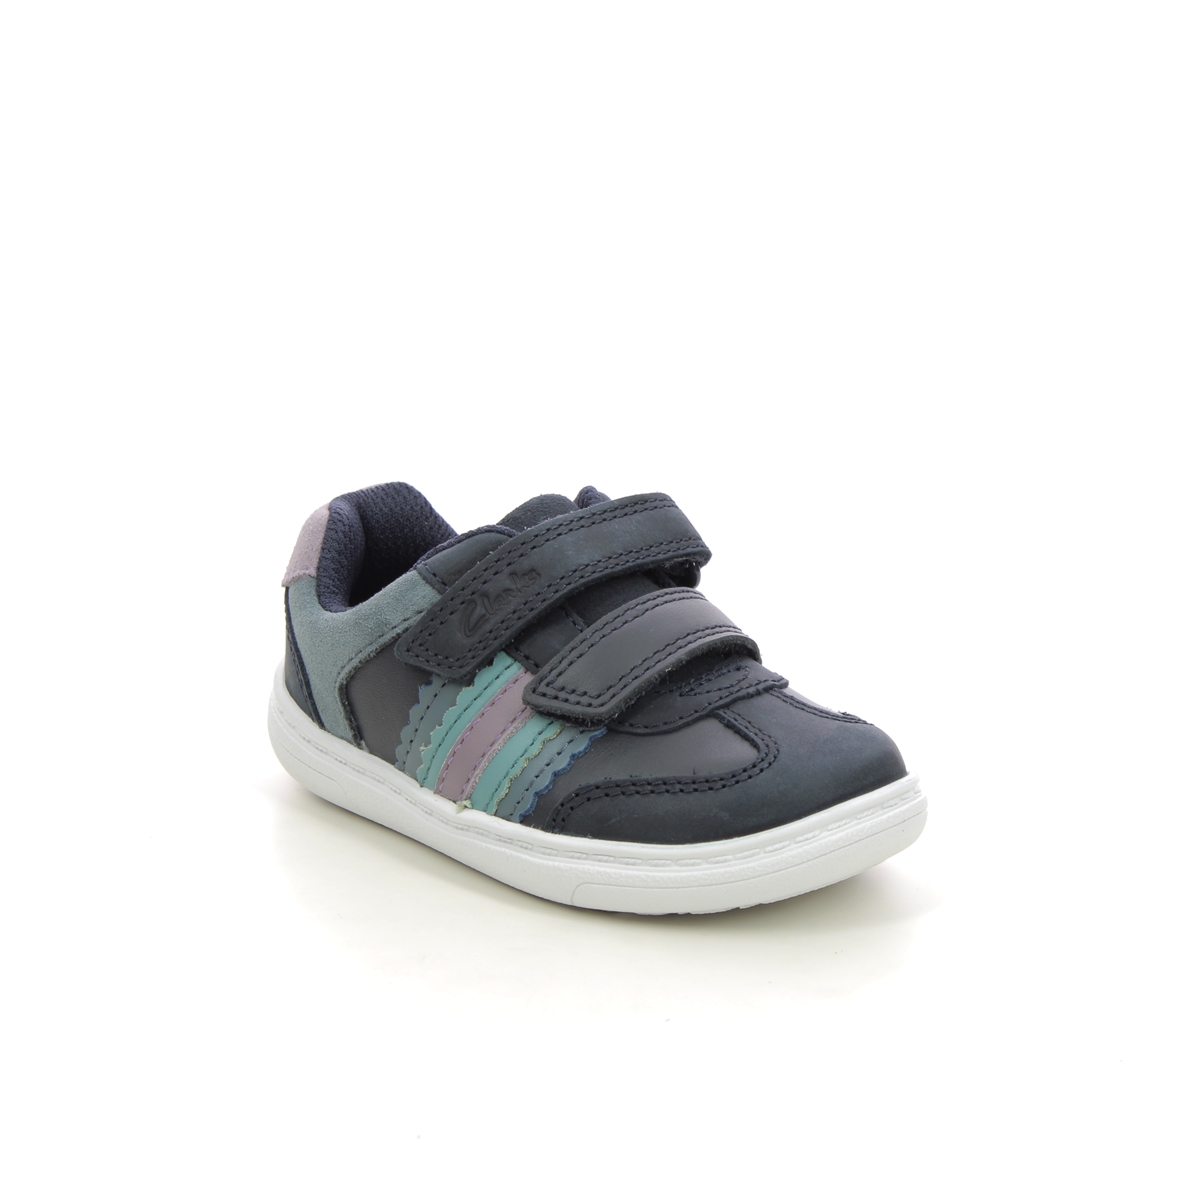 Clarks Flash Band T Navy Leather Kids first shoes 7539-56F in a Plain Leather in Size 6.5